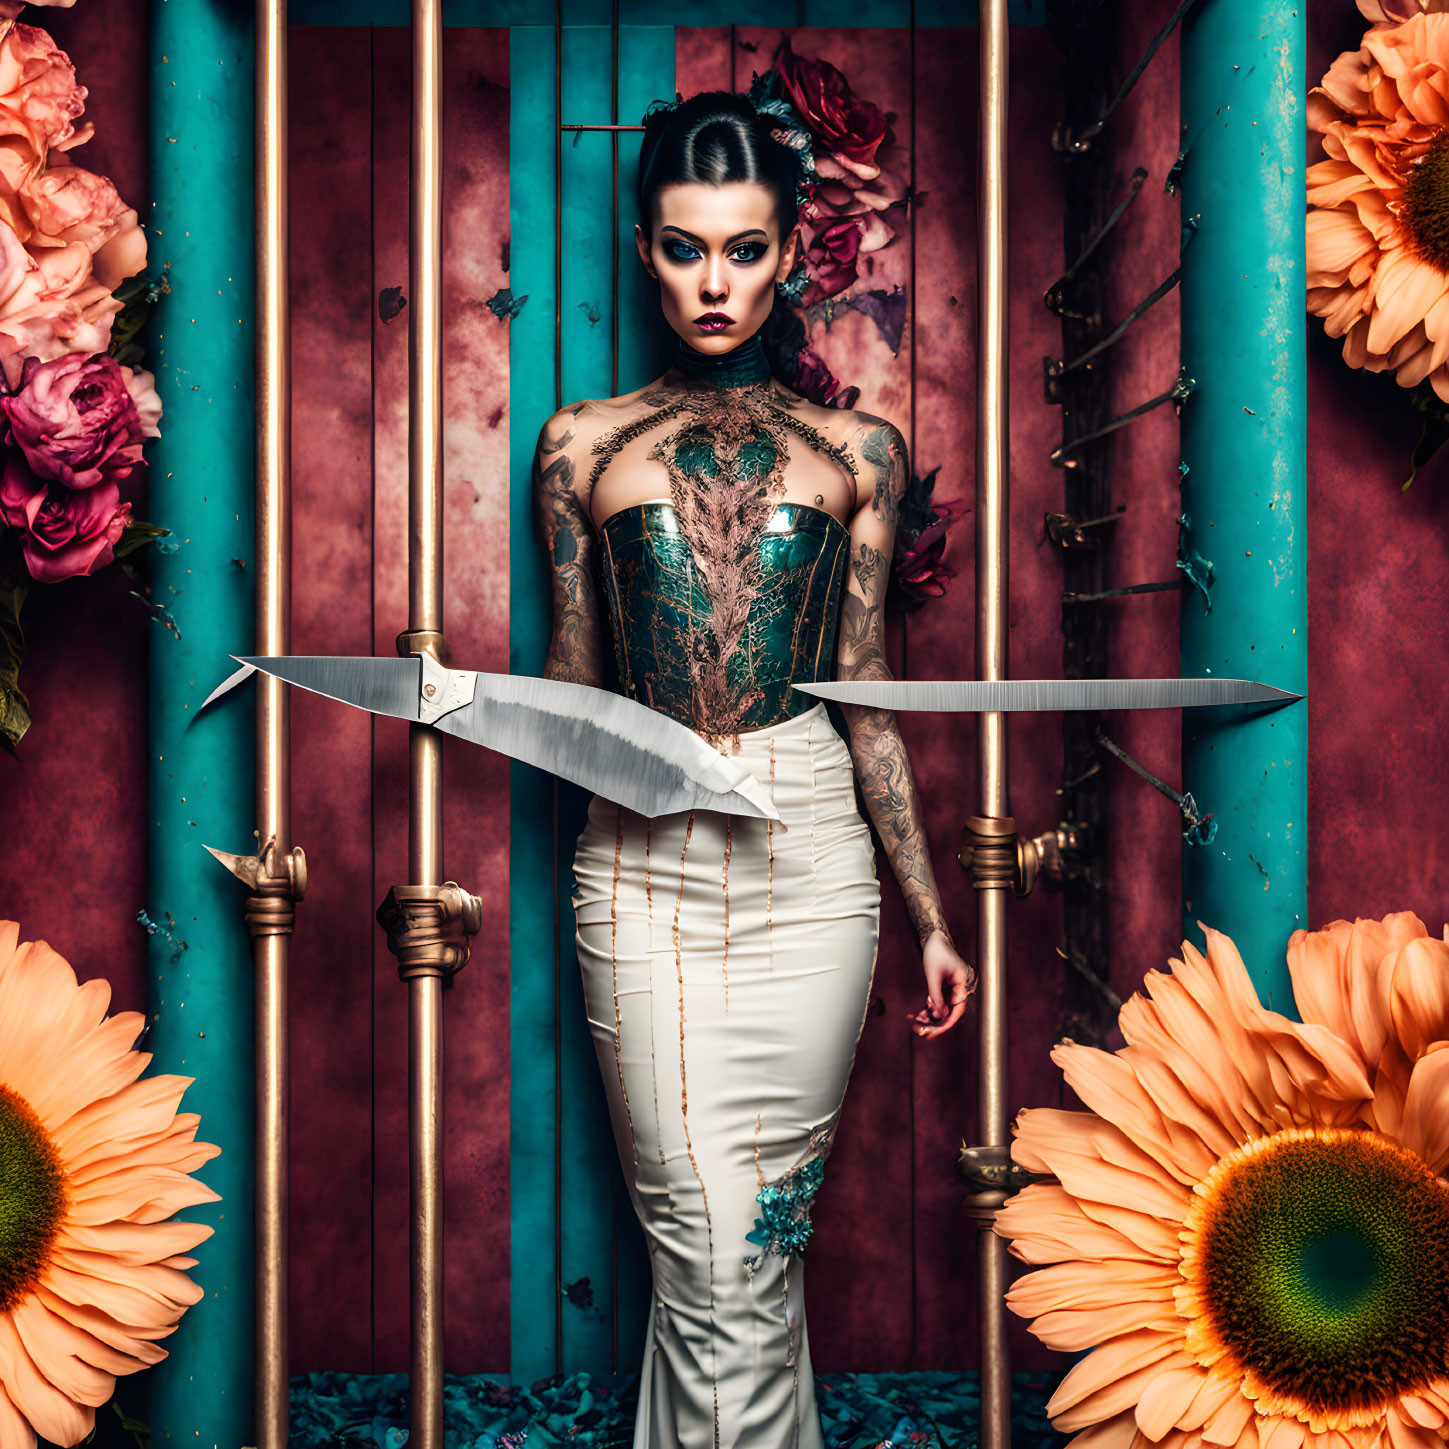 Elaborately made-up woman with sword and sunflowers on teal-patterned backdrop